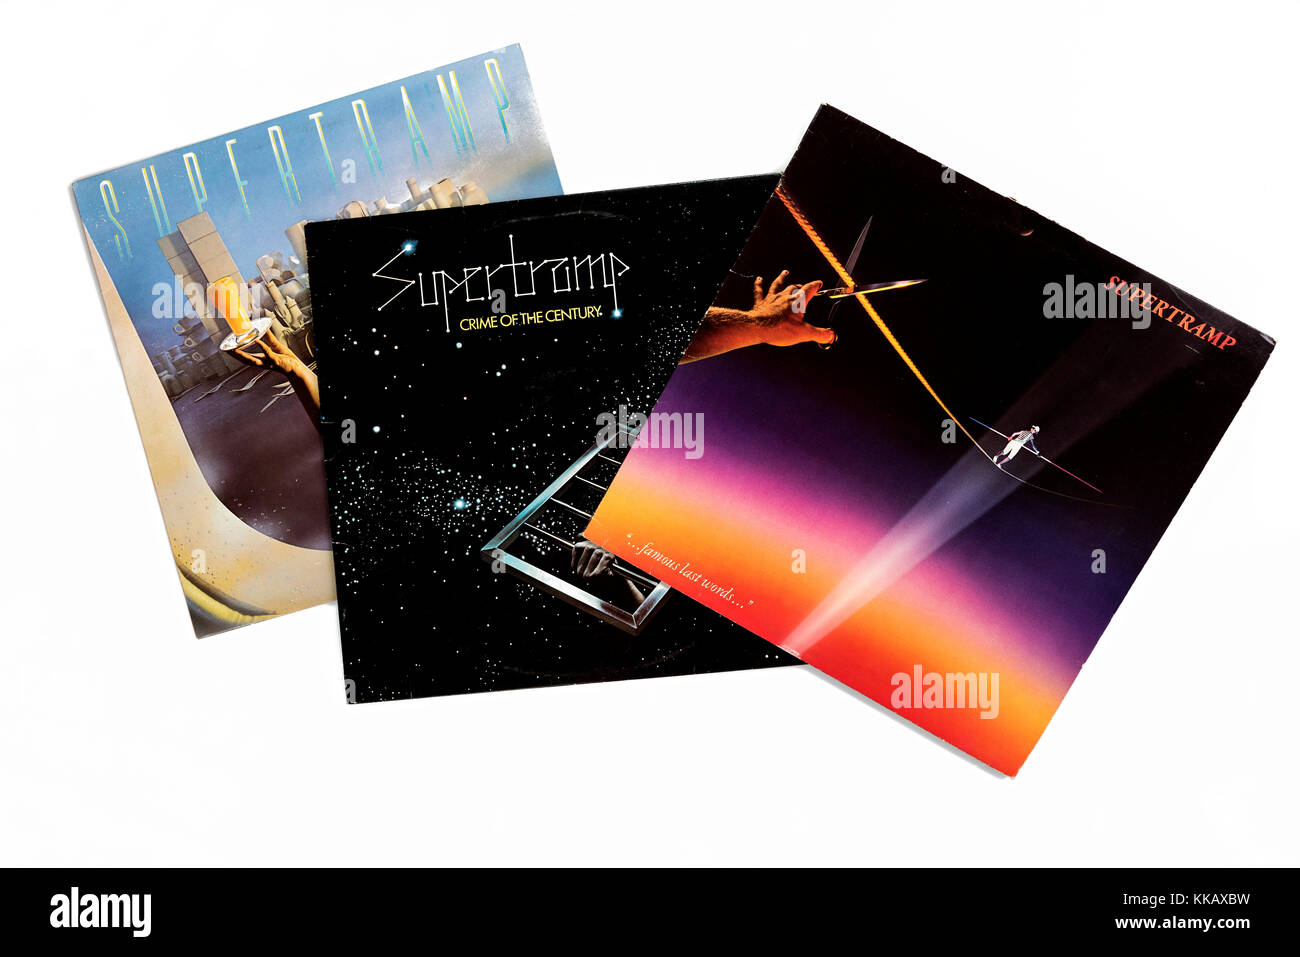 Supertramp, Crime of the Century, Breakfast in America, Famous Last Words, Album covers. Stock Photo